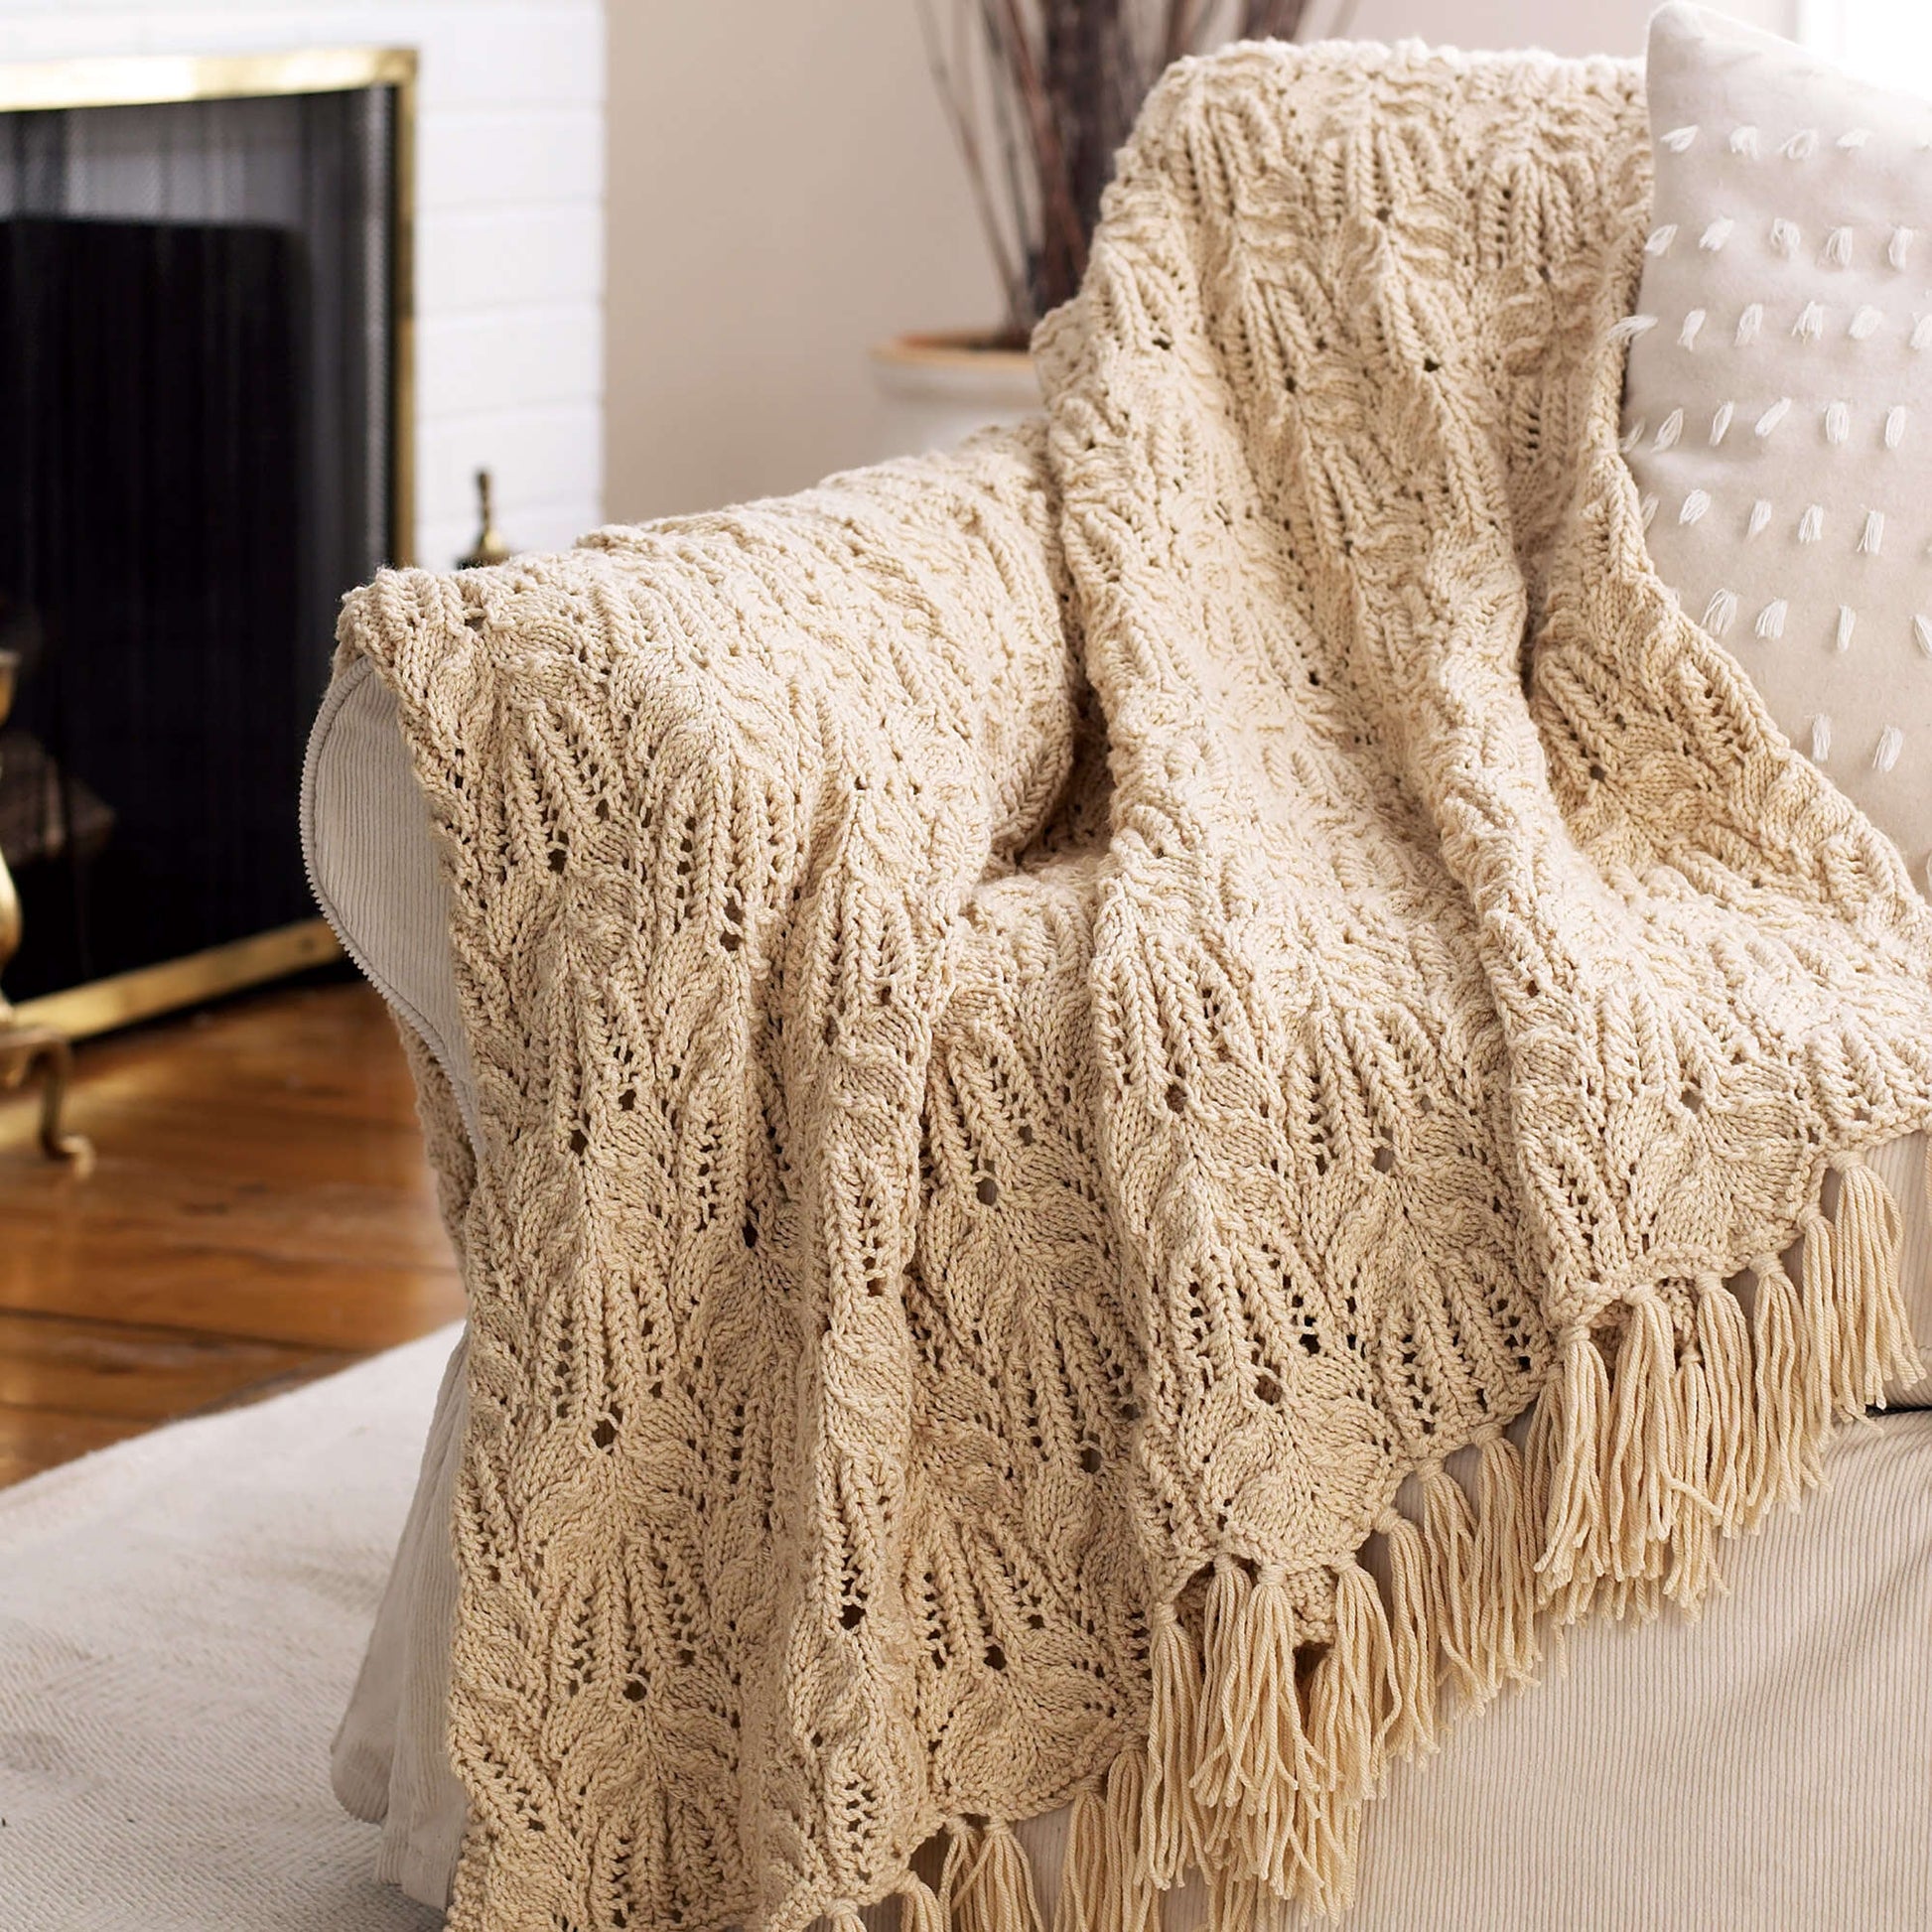 Free Bernat Knit Lace And Cable Afghan Pattern